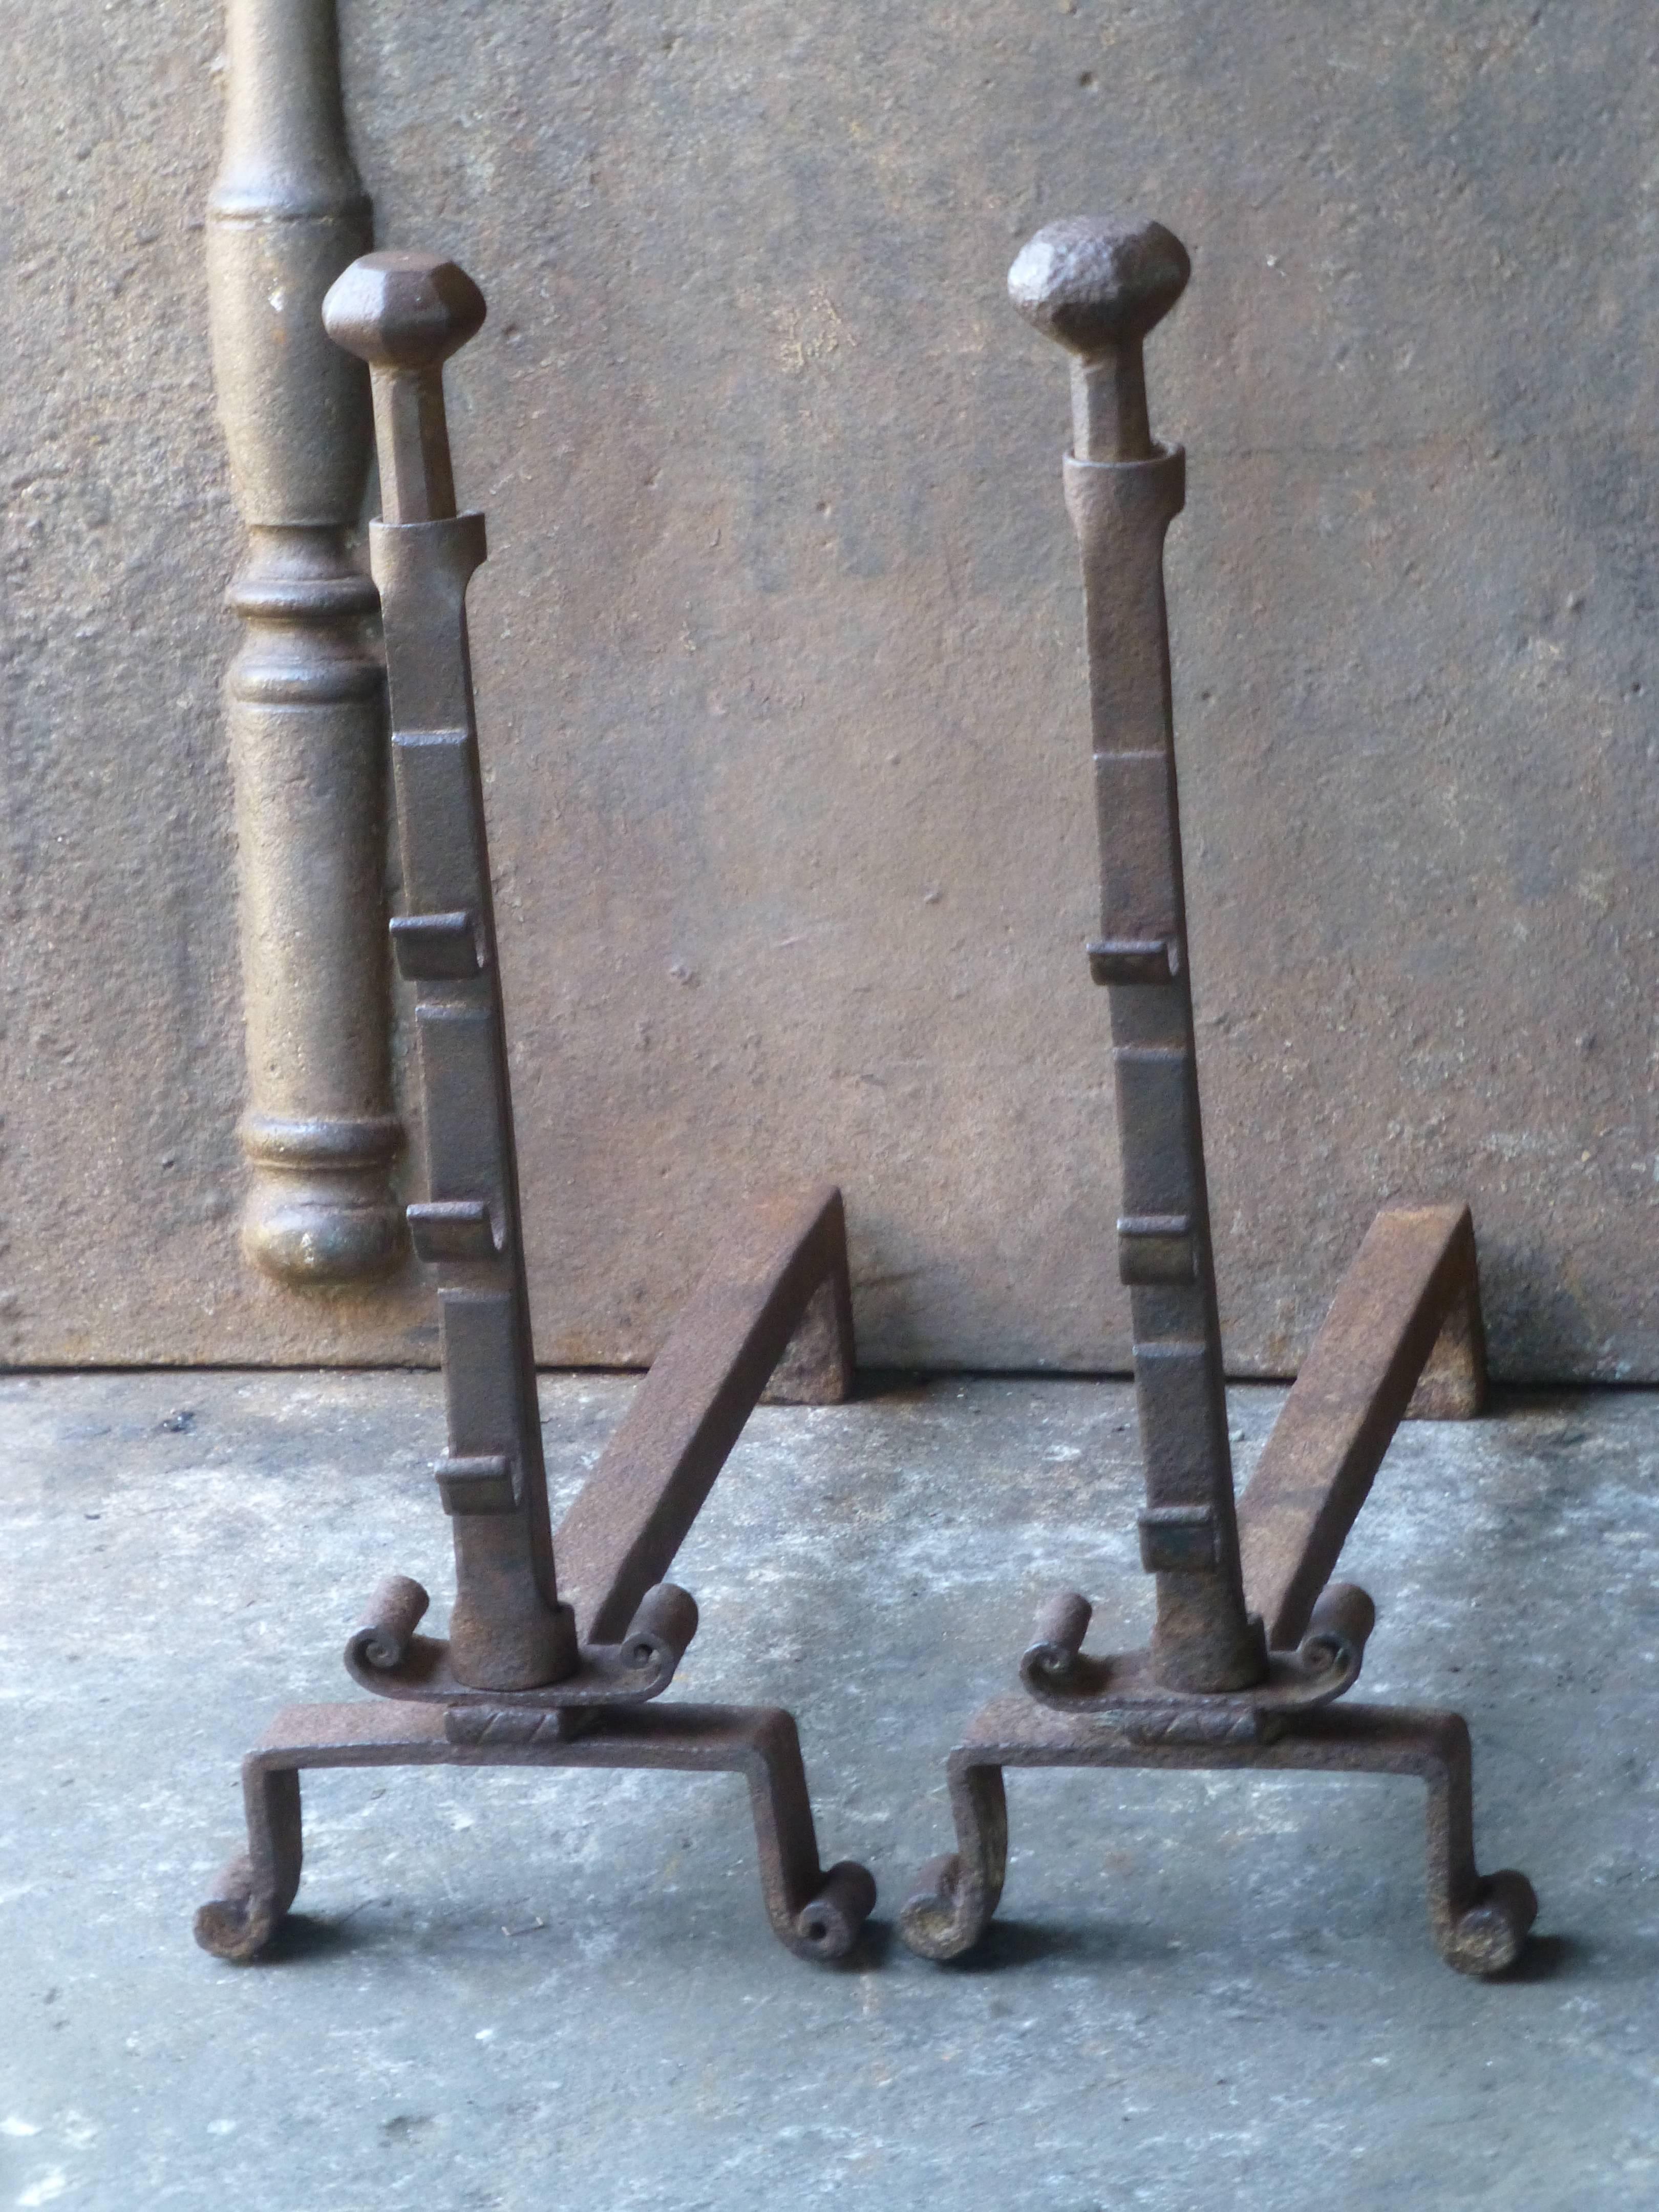 Sturdy set, magnificent craftsmanship. With spit hooks for grilling meat in the early kitchen.